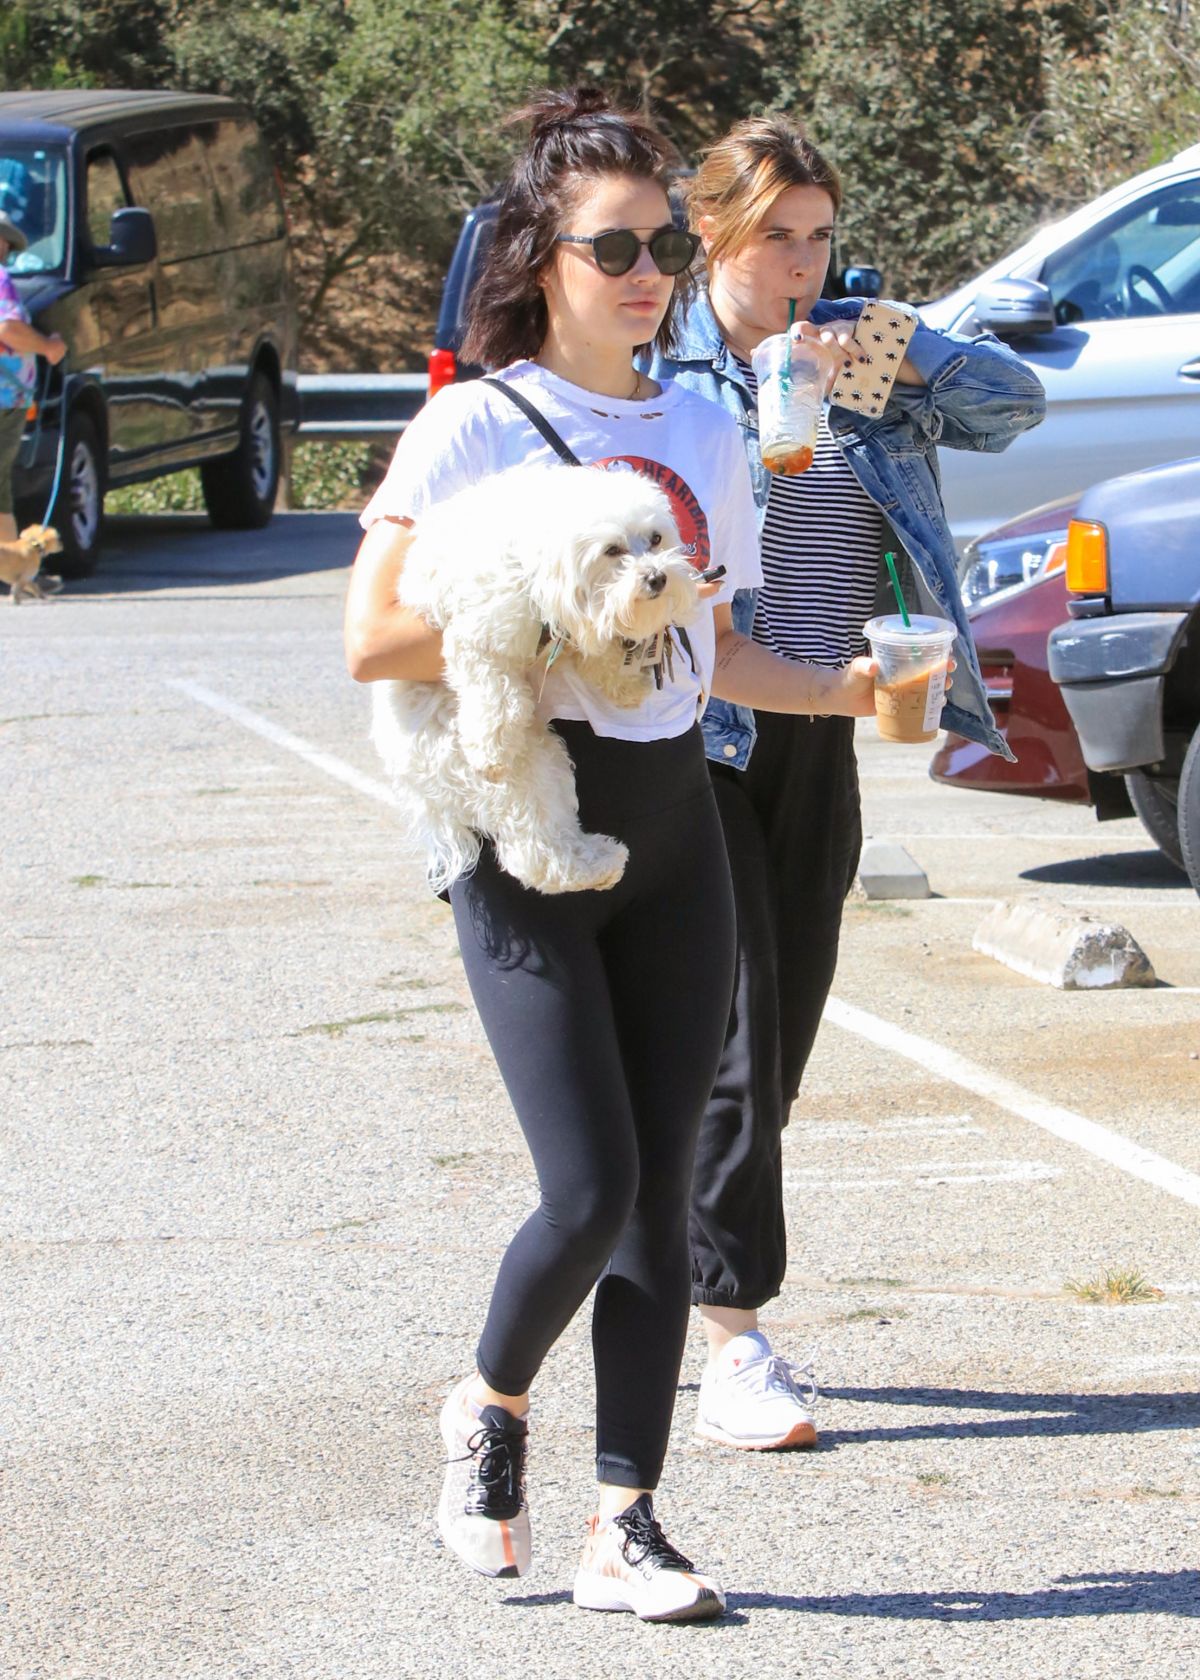 LUCY HALE at a Dog Park in Los Angeles 09/19/2018 – HawtCelebs